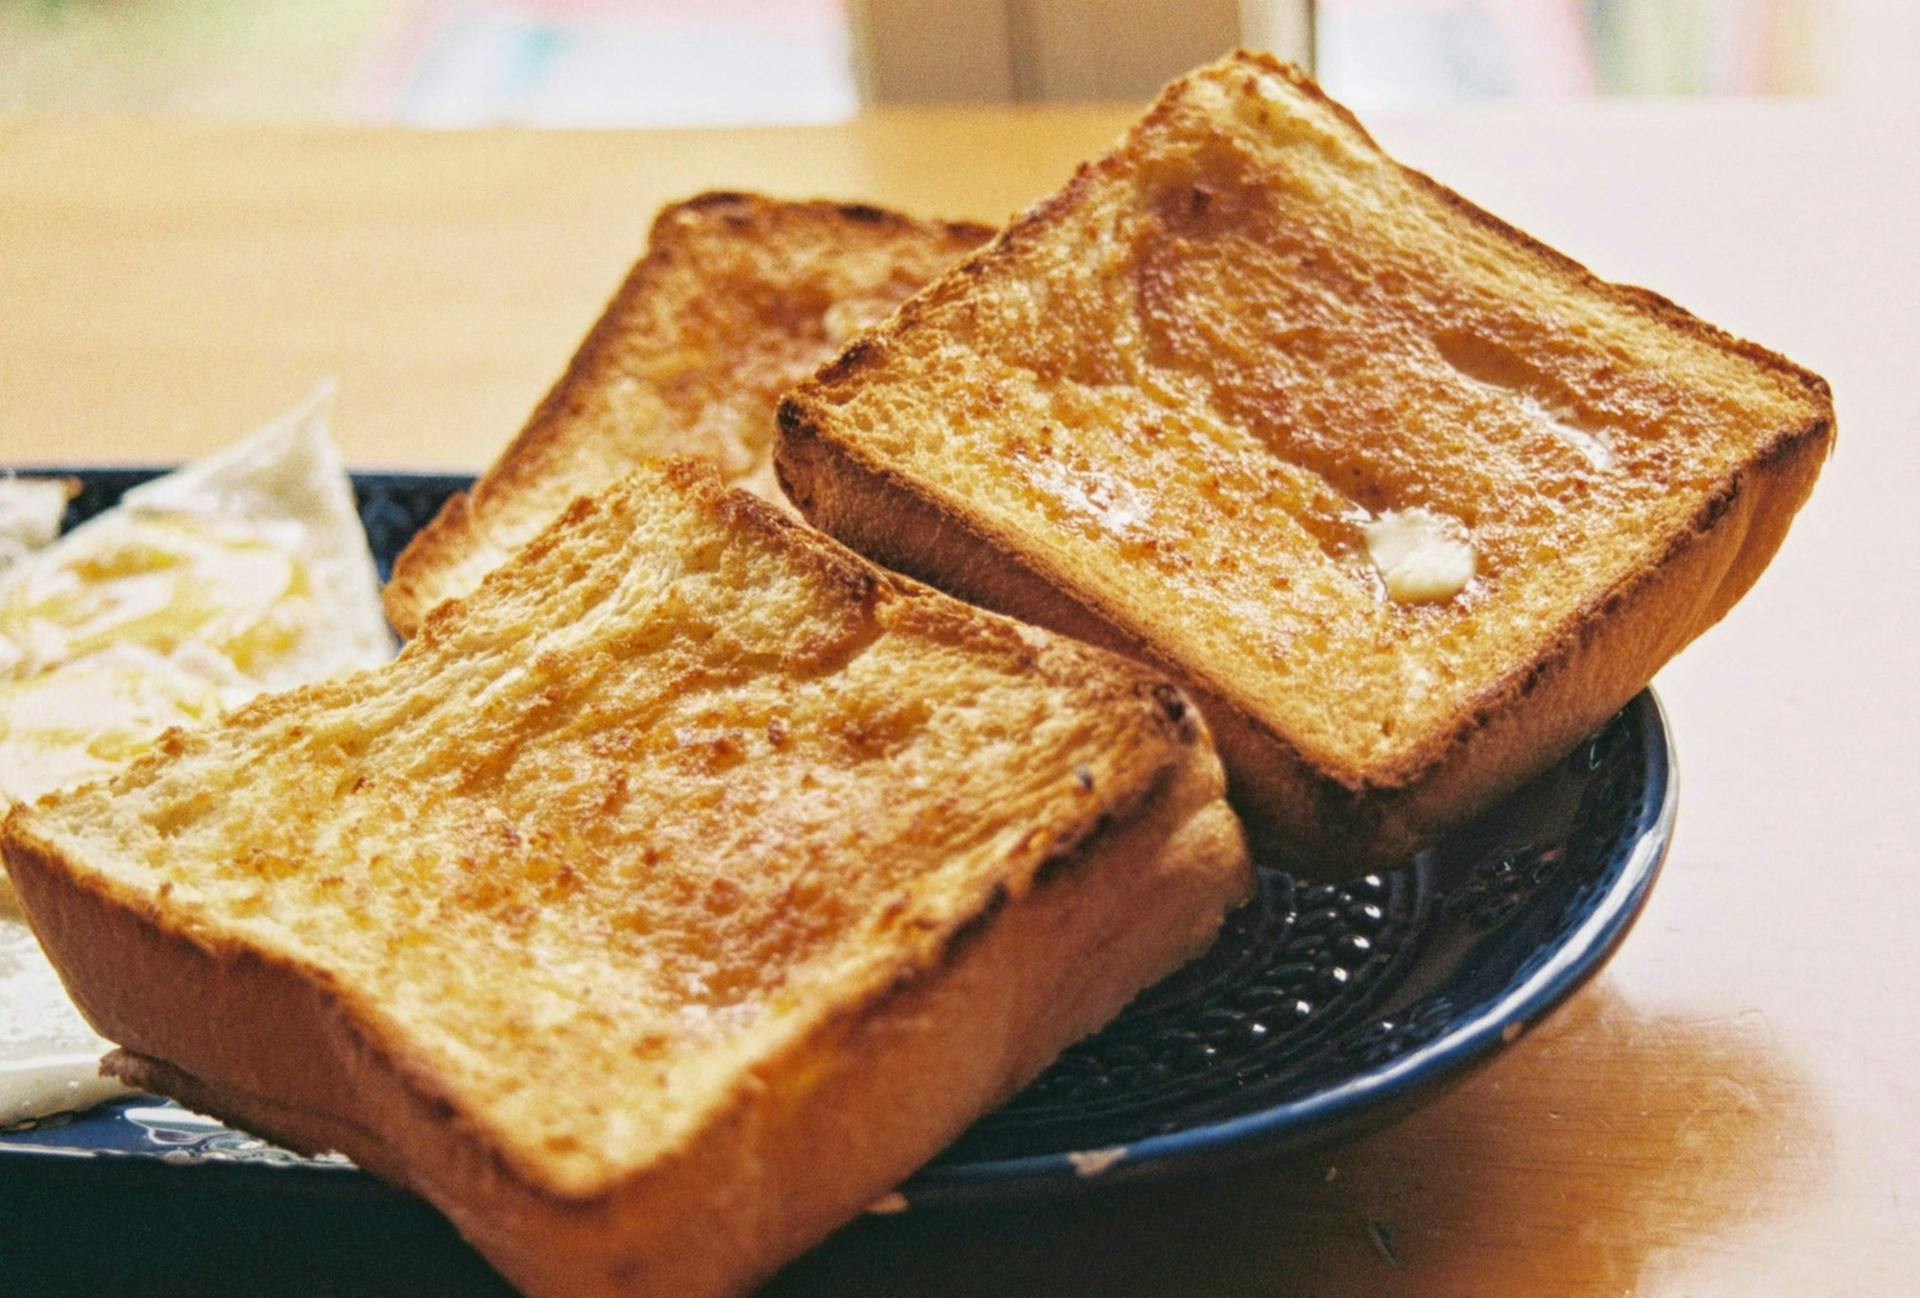 What is burnt toast theory and how can it help us reframe life’s inconveniences?